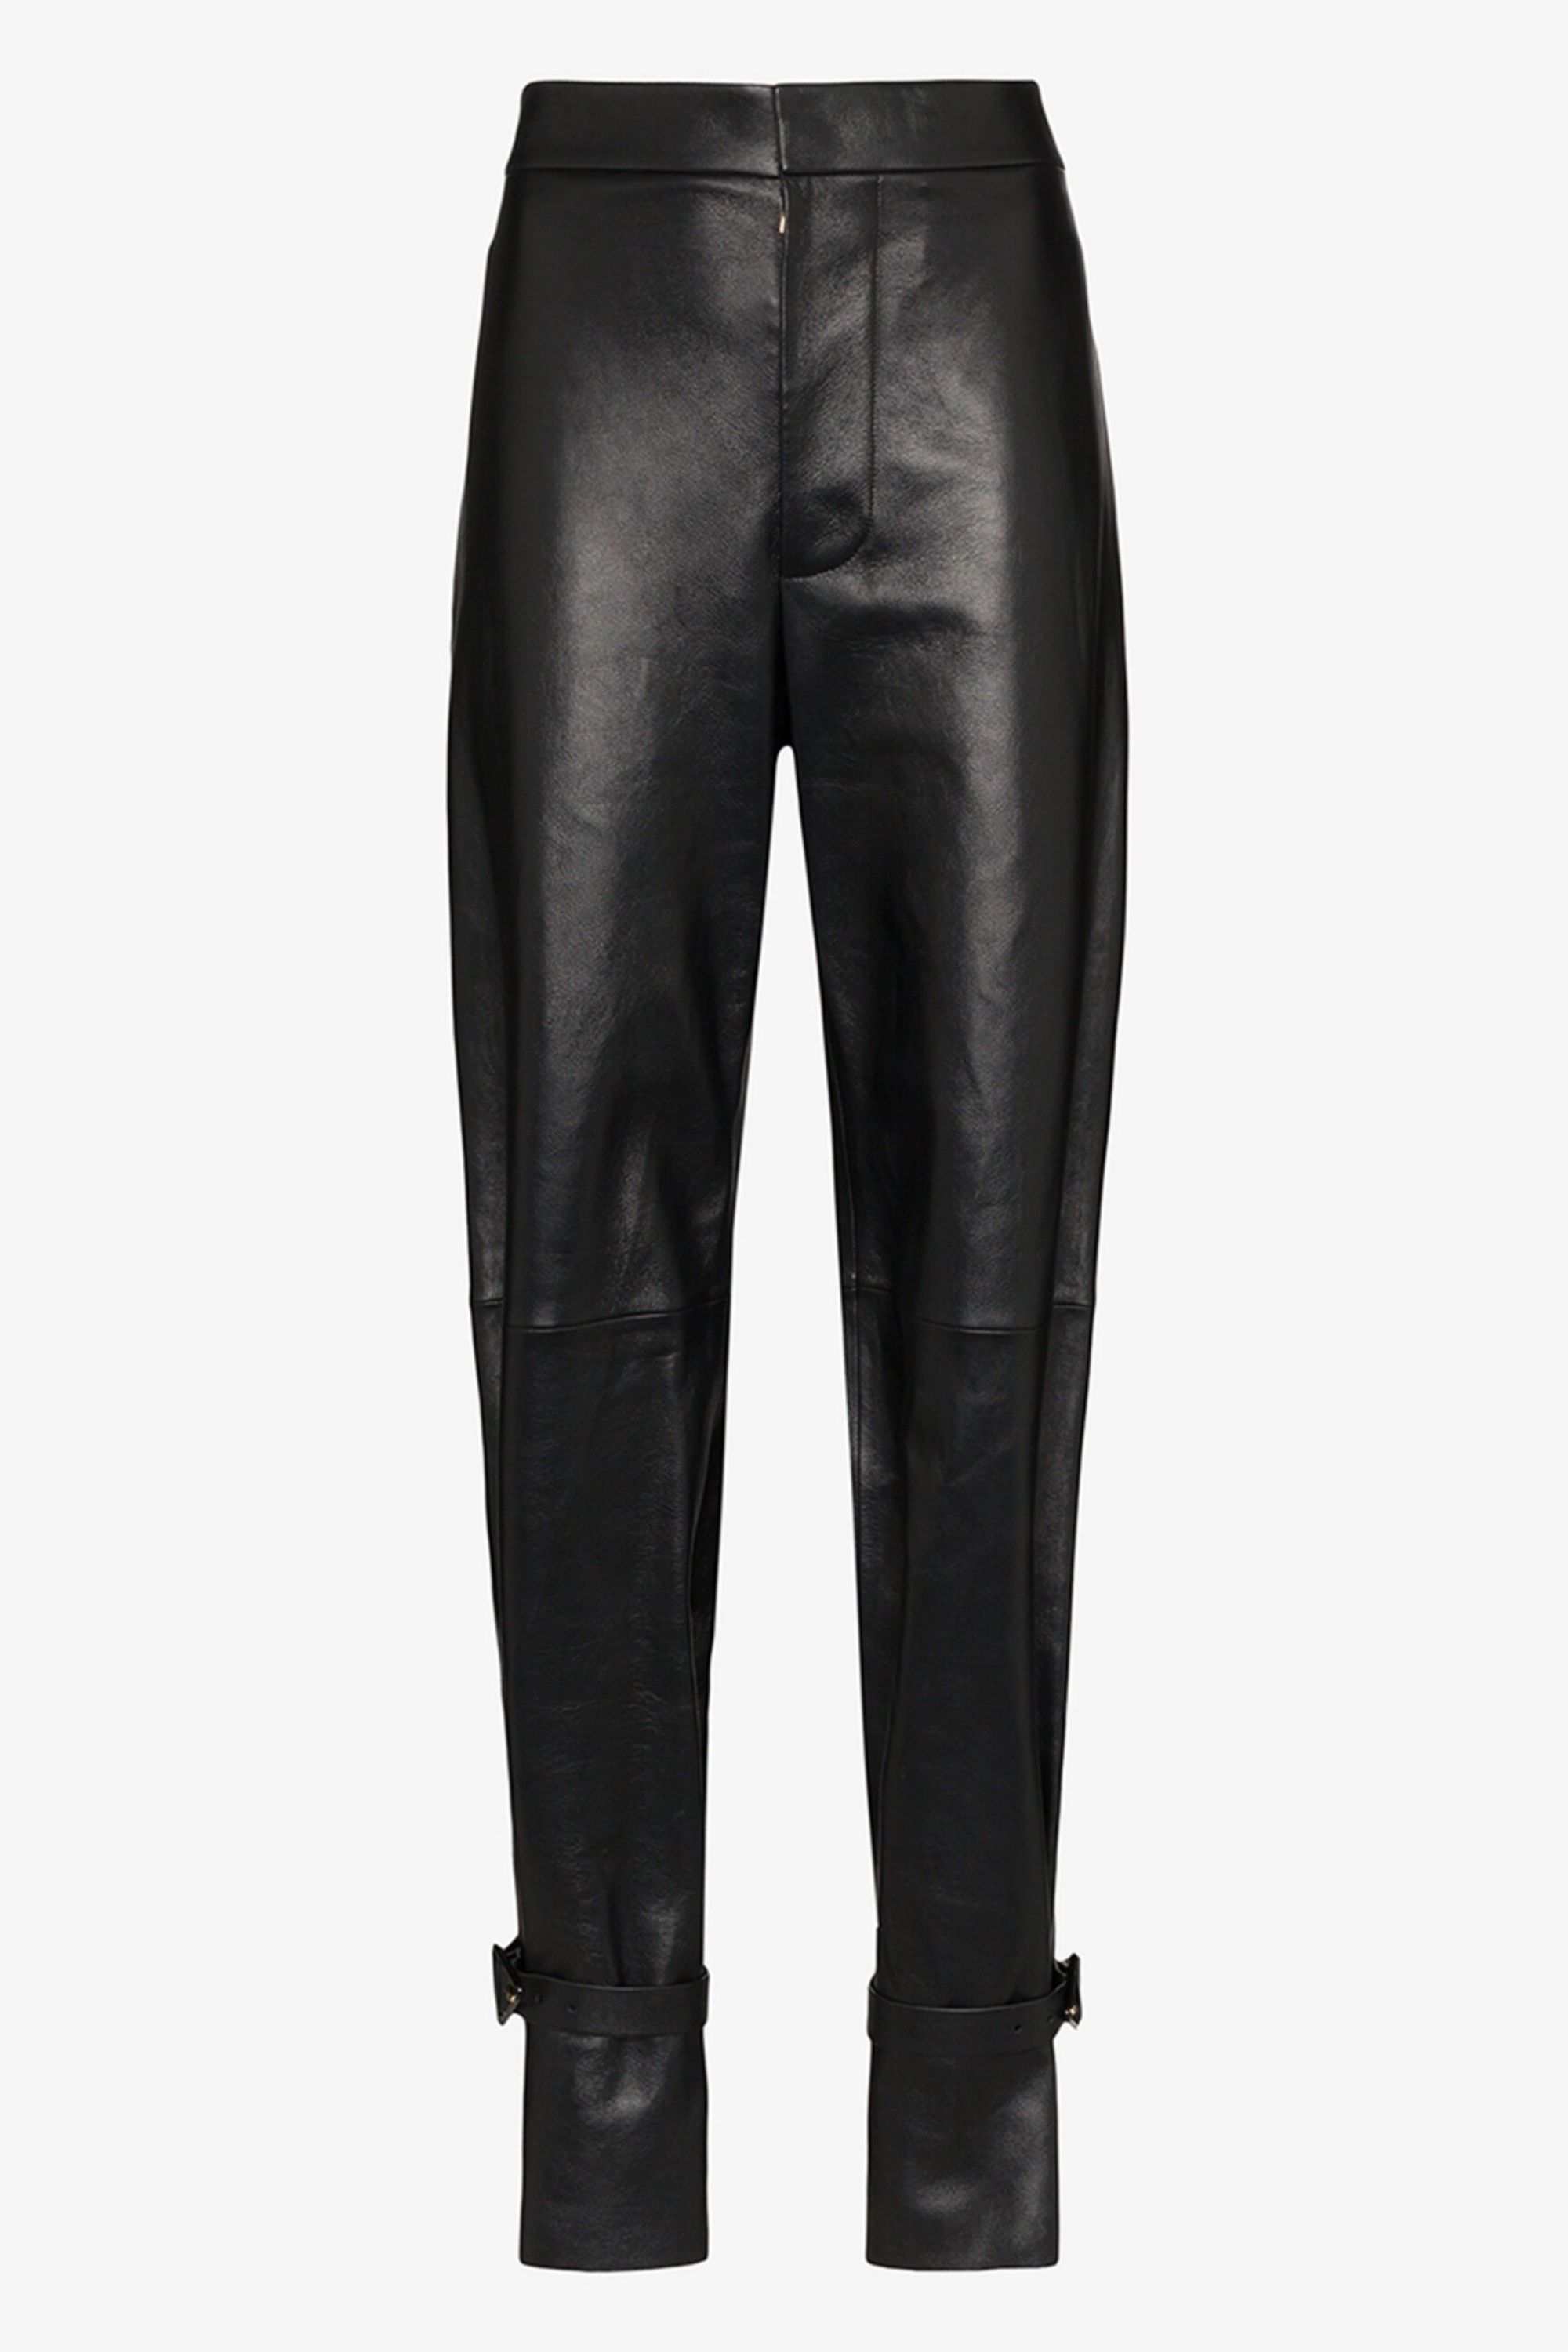 where can i buy leather trousers